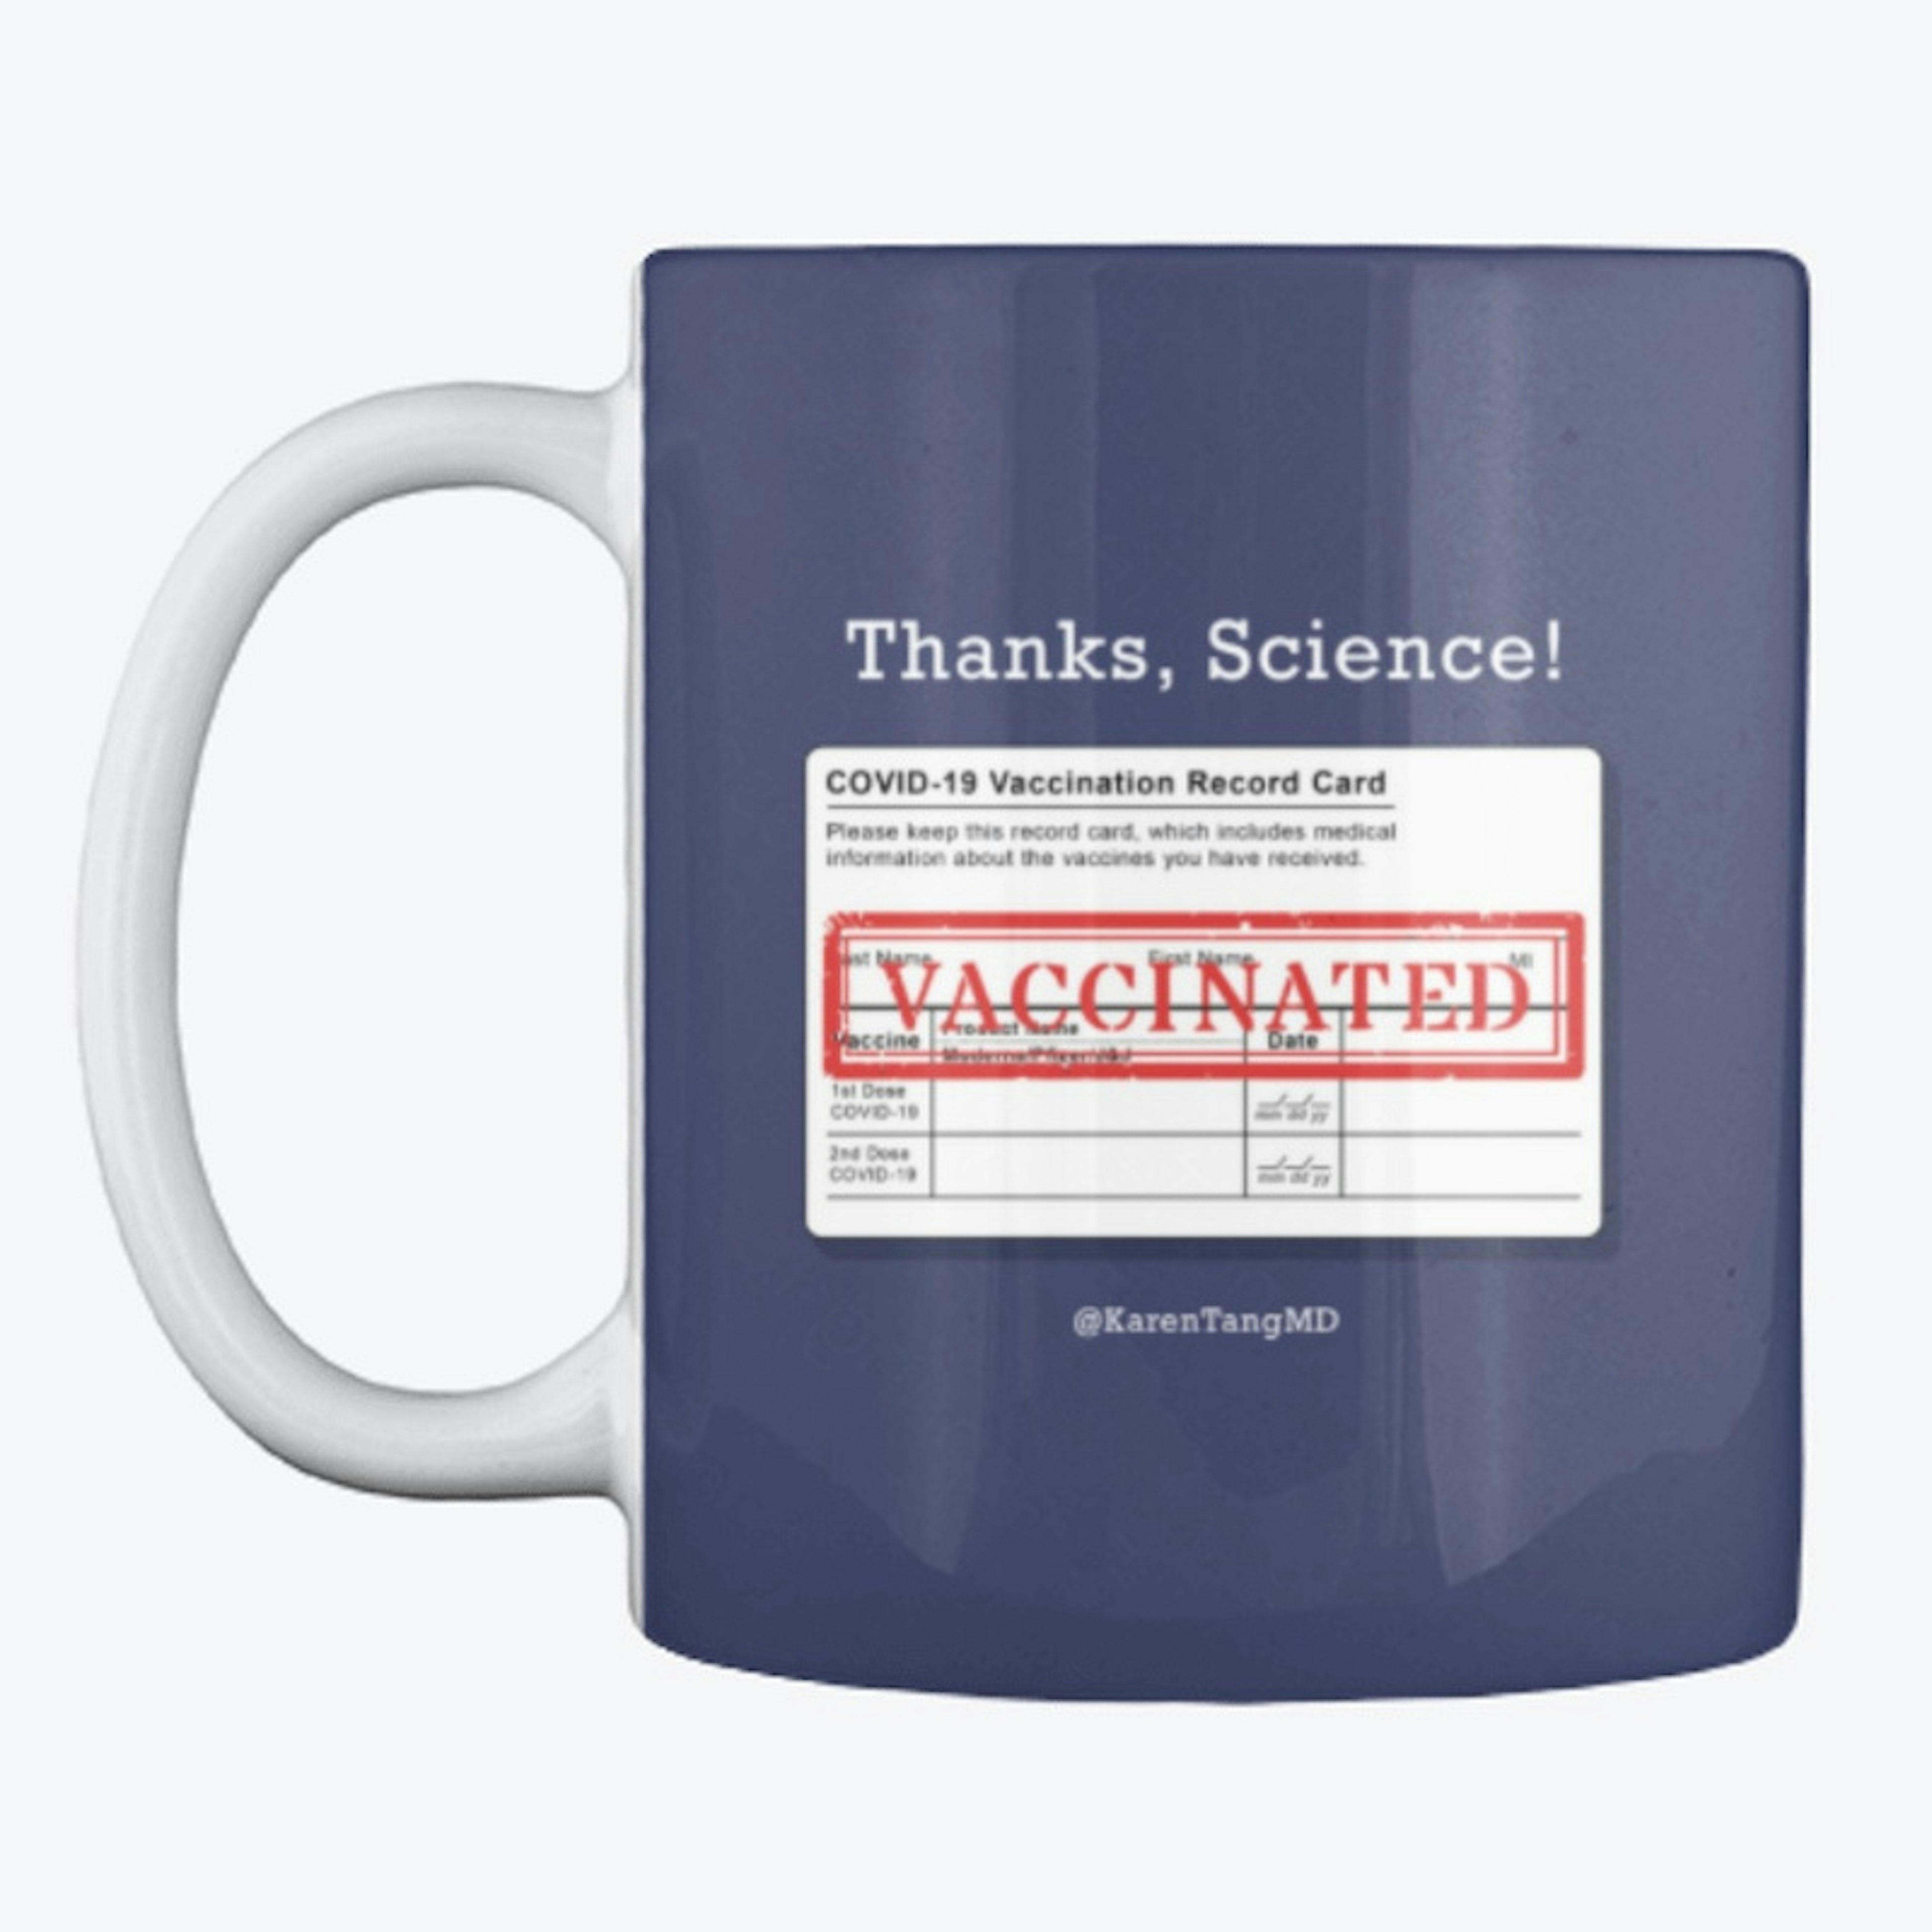 Thanks Science!  *VACCINATED*